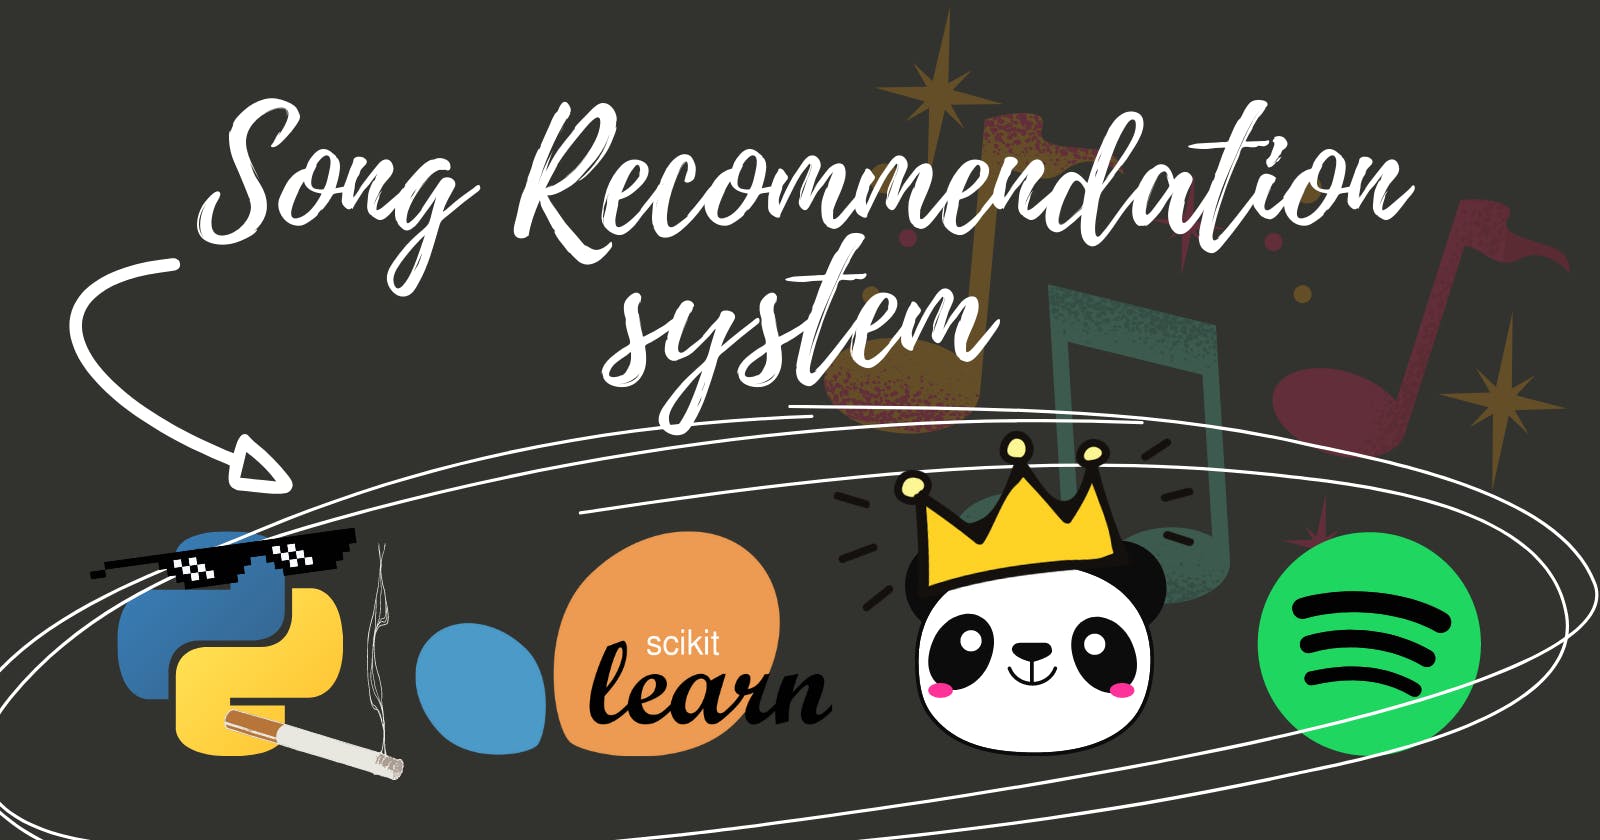 How I built a Song Recommendation System with Python, Scikit-Learn and Pandas